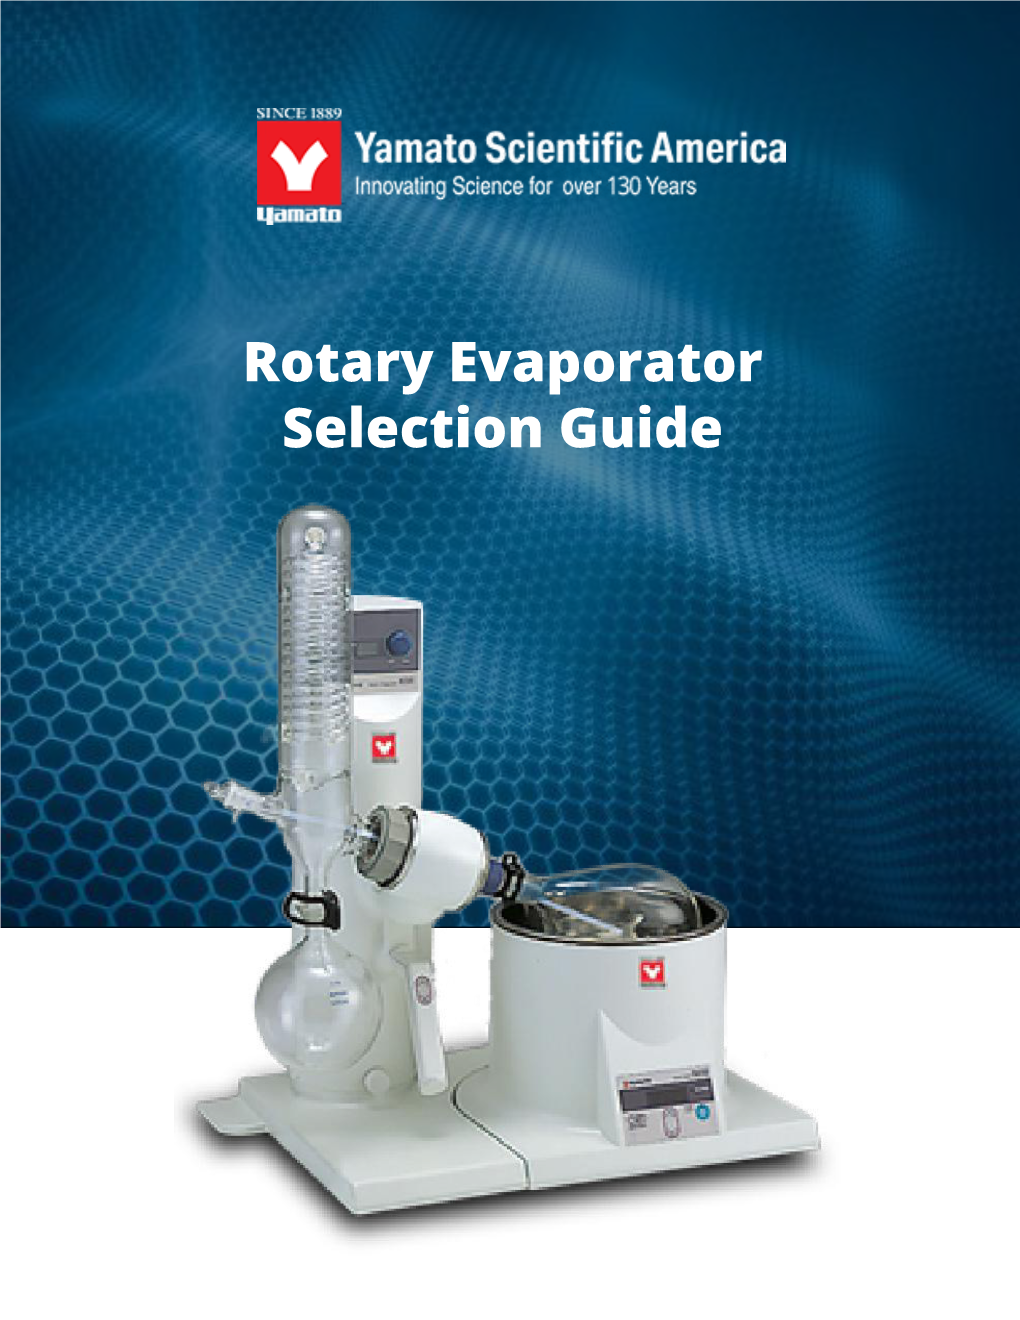 Rotary Evaporator Selection Guide